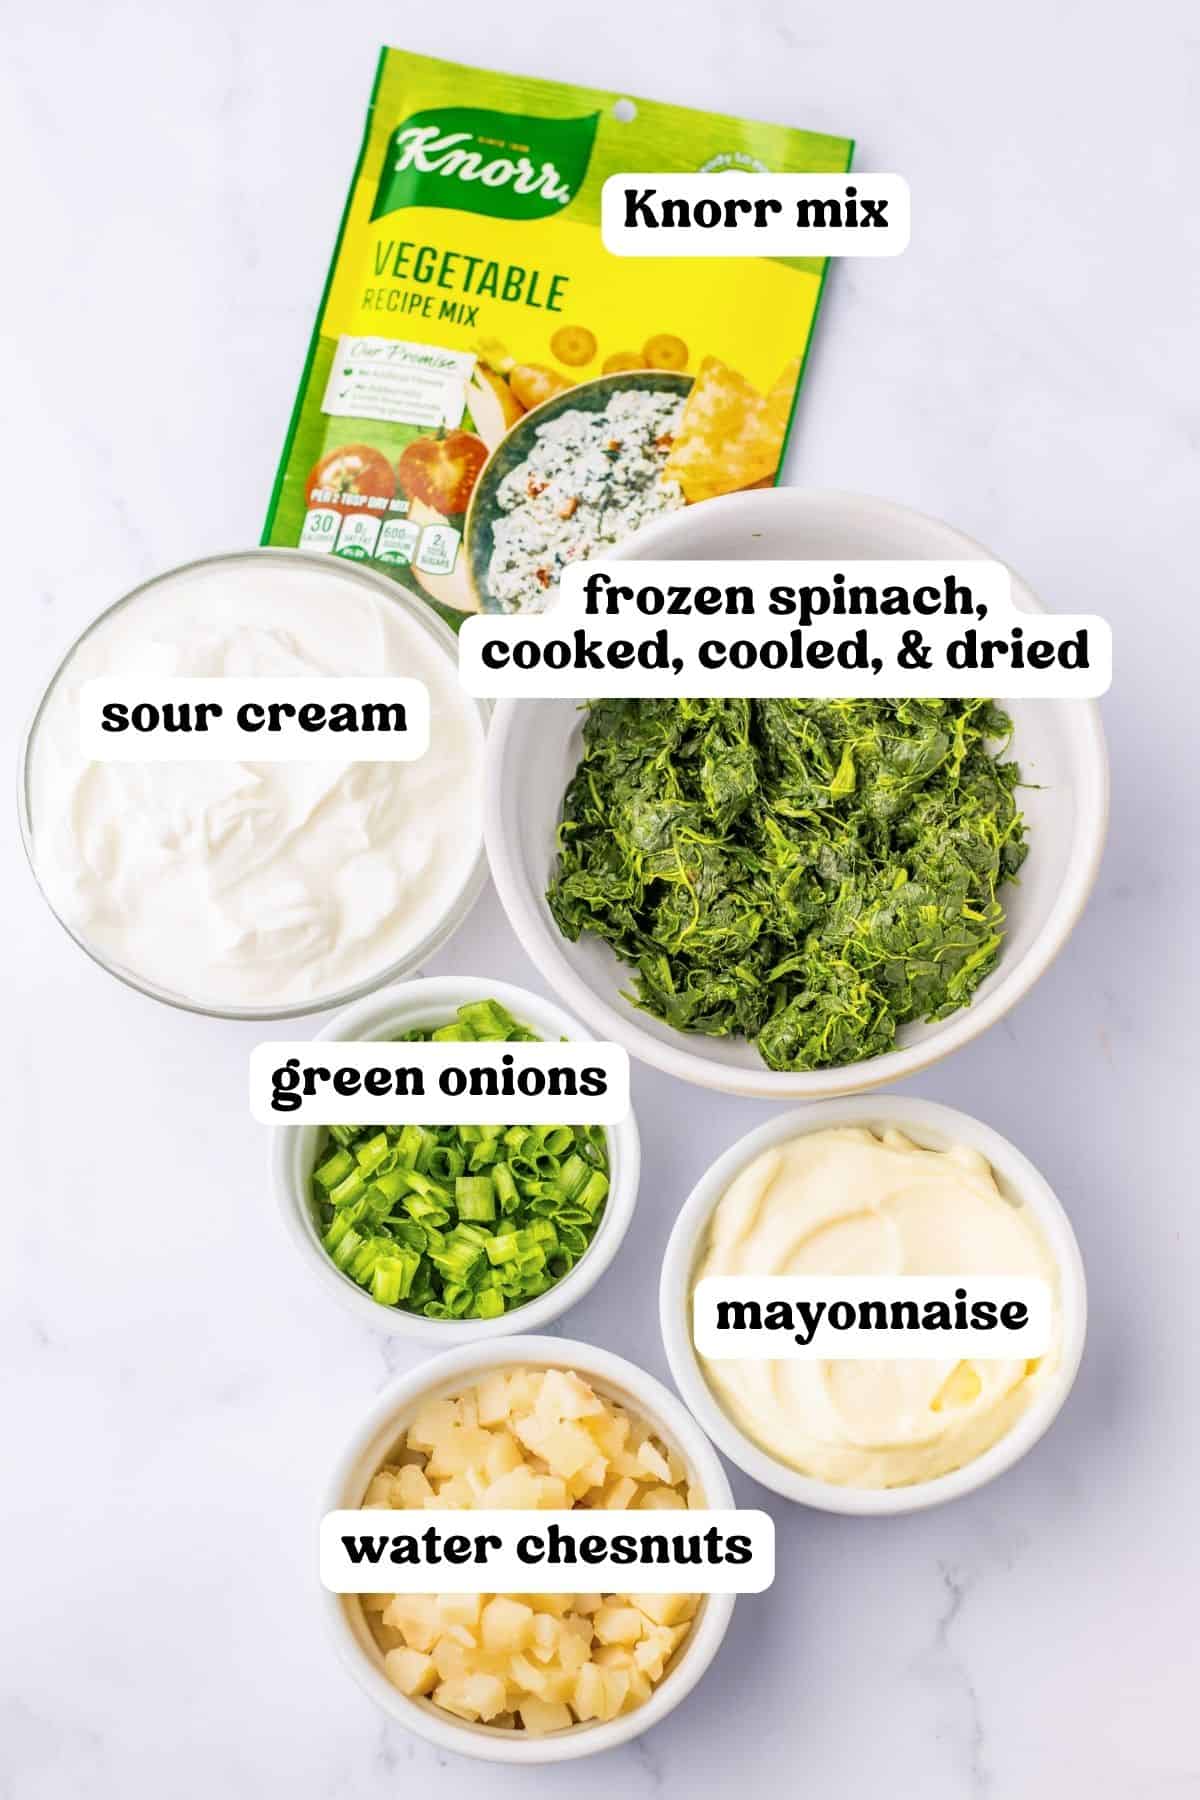 Knorr vegetable recipe mix packet, frozen chopped spinach, sour cream, mayonnaise, chopped green onions, and water chesnuts.